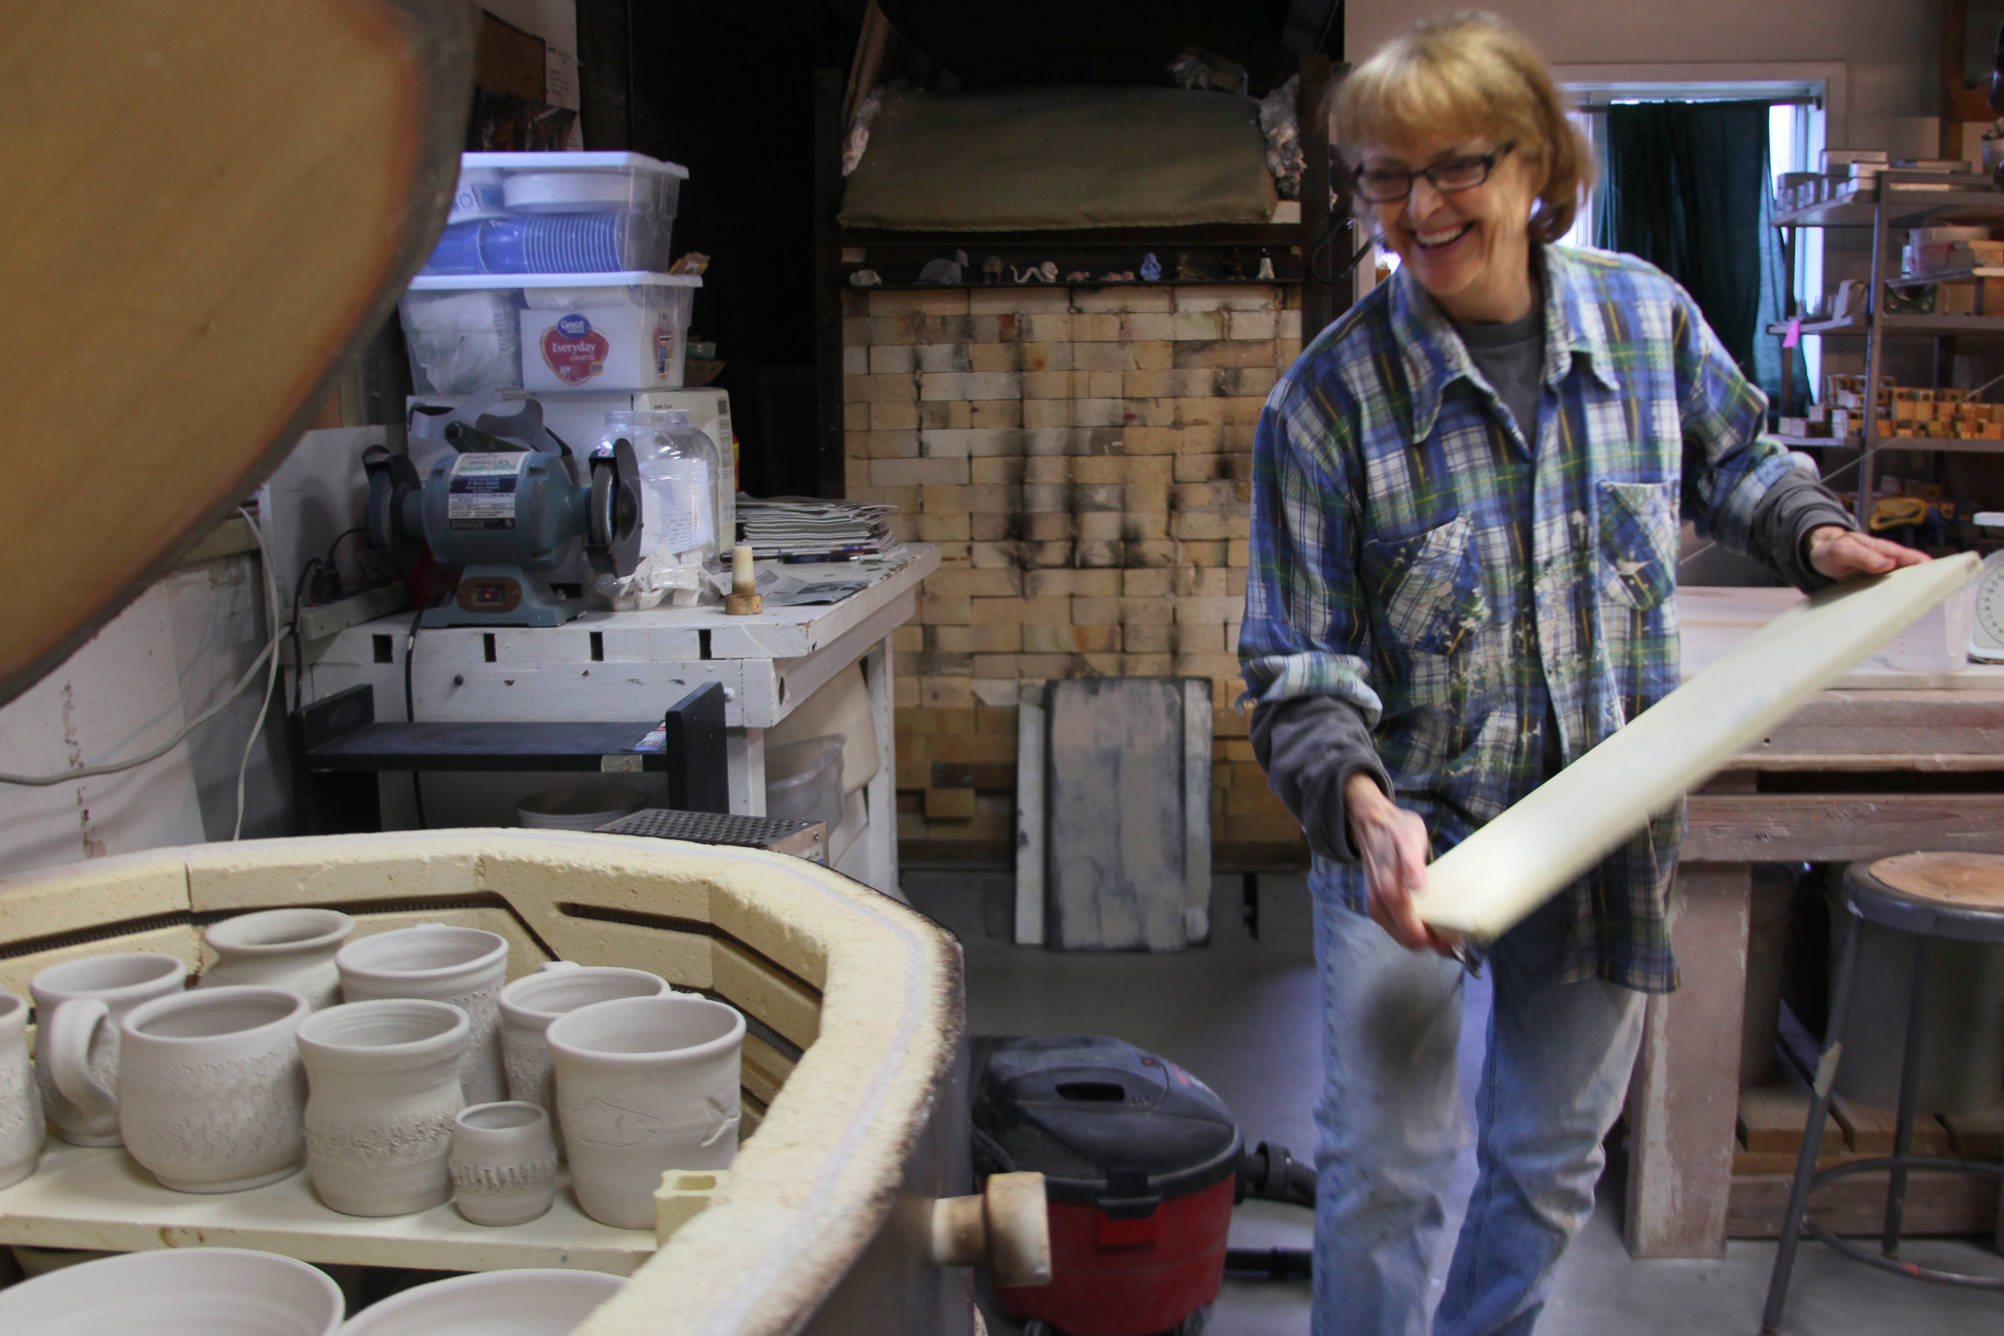 Kenai Potters Guild member Judy Brandt loads a gas-fired kiln with cups and bowls made by Guild members on Thursday, Oct. 12, 2017 at the group’s studio in Kenai. The Potters guild is preparing for a busy winter with weekly classes, a “Clay on Display” art show presently sitting in the Kenai Fine Art Center gallery, and a new kind of kiln which they’ll be experimenting with this weekend. (Ben Boettger/Peninsula Clarion)